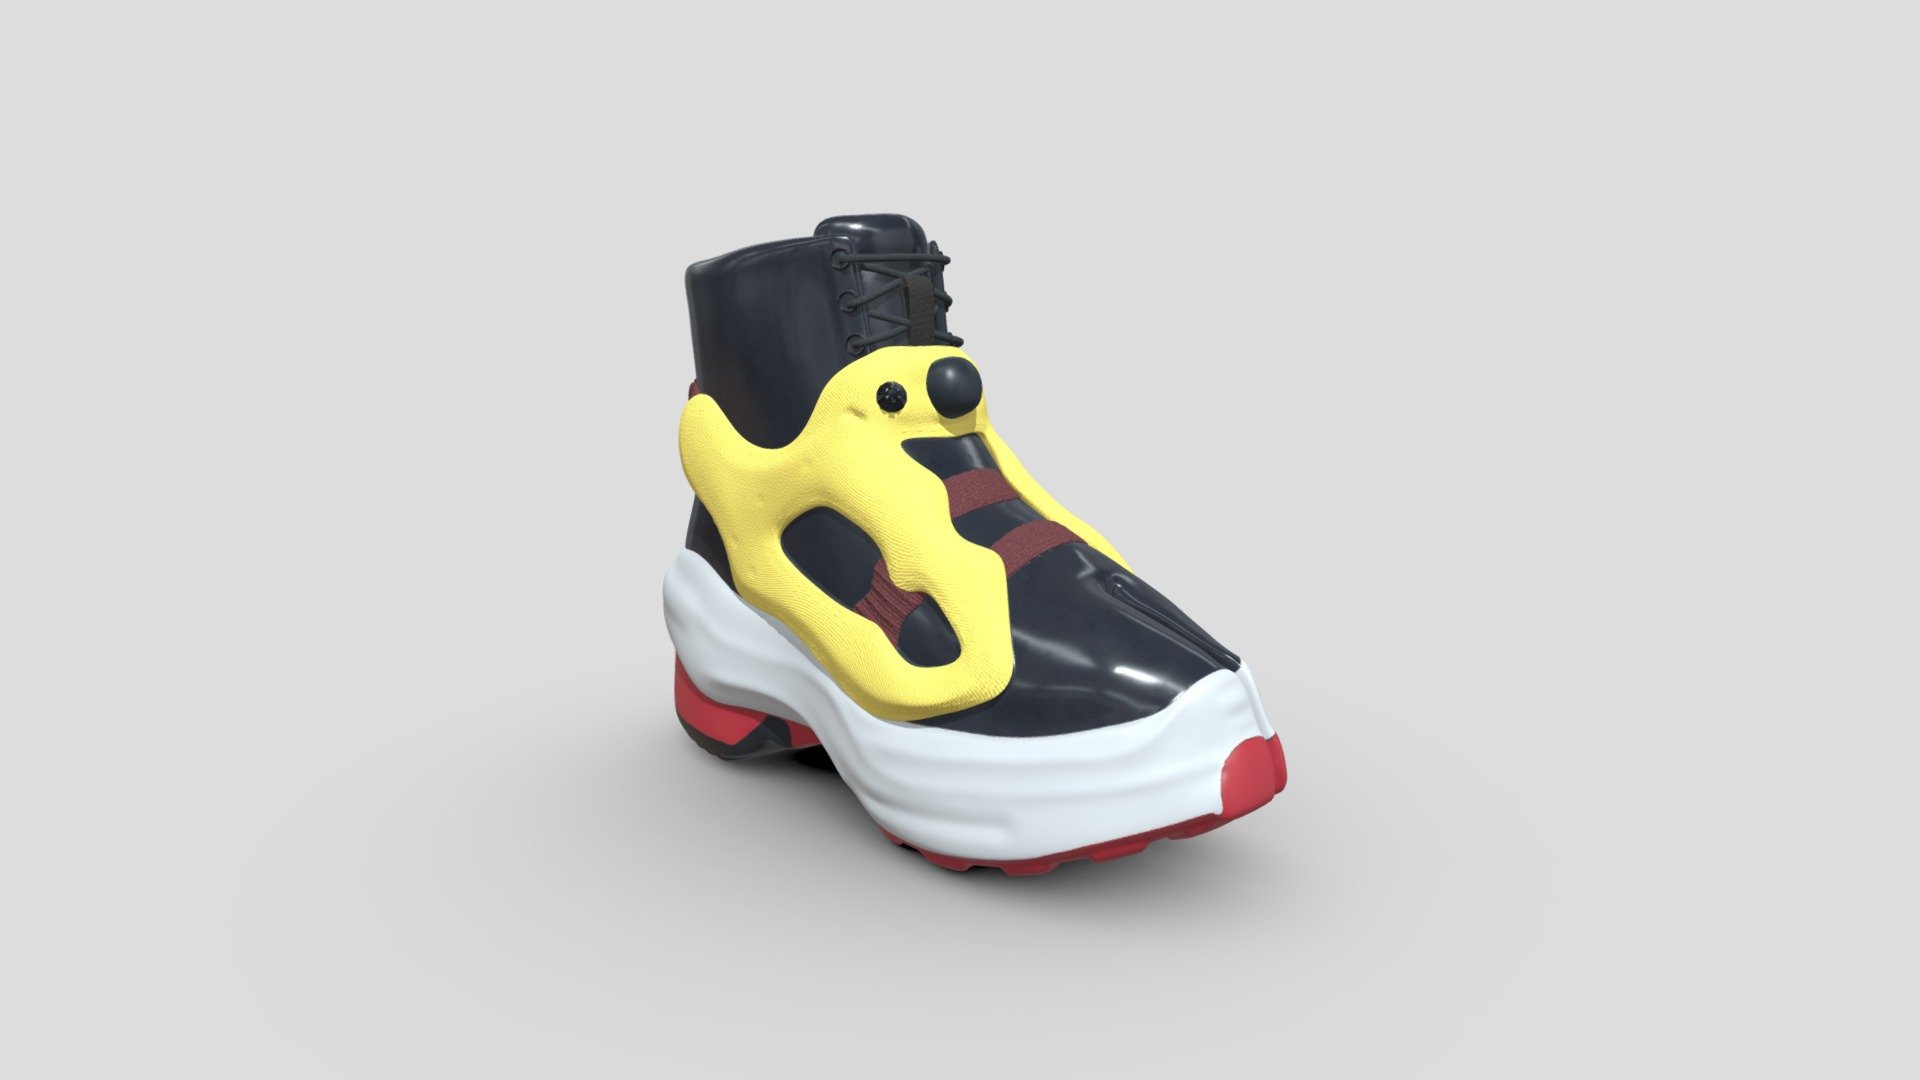 Textured 3d model.
Design based on Instapump Fury collaboration by Maison Margiela x Reebok.
Non-commercial use only.
All rights belongs to their owners (Reebok and/or Maison Margiela) - Maison Margiela x Reebok Instapump Fury - Download Free 3D model by Vladislav Fedulov (@Vlxdxslxv) 3d model